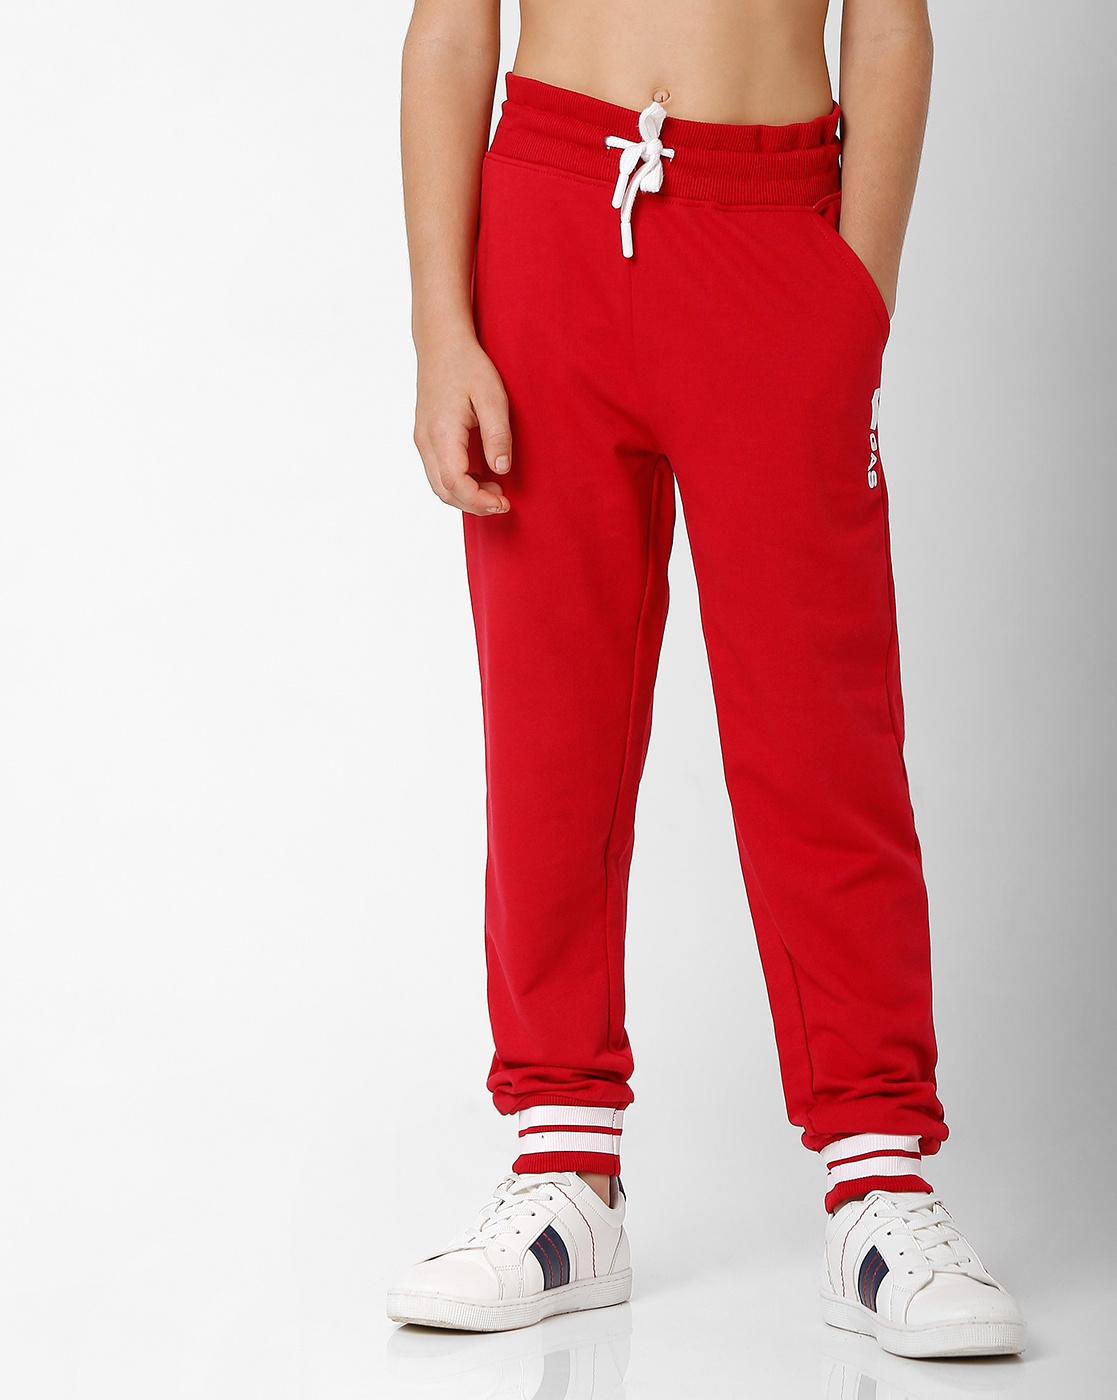 GAS KIDS Boys Solid Red Trackpants